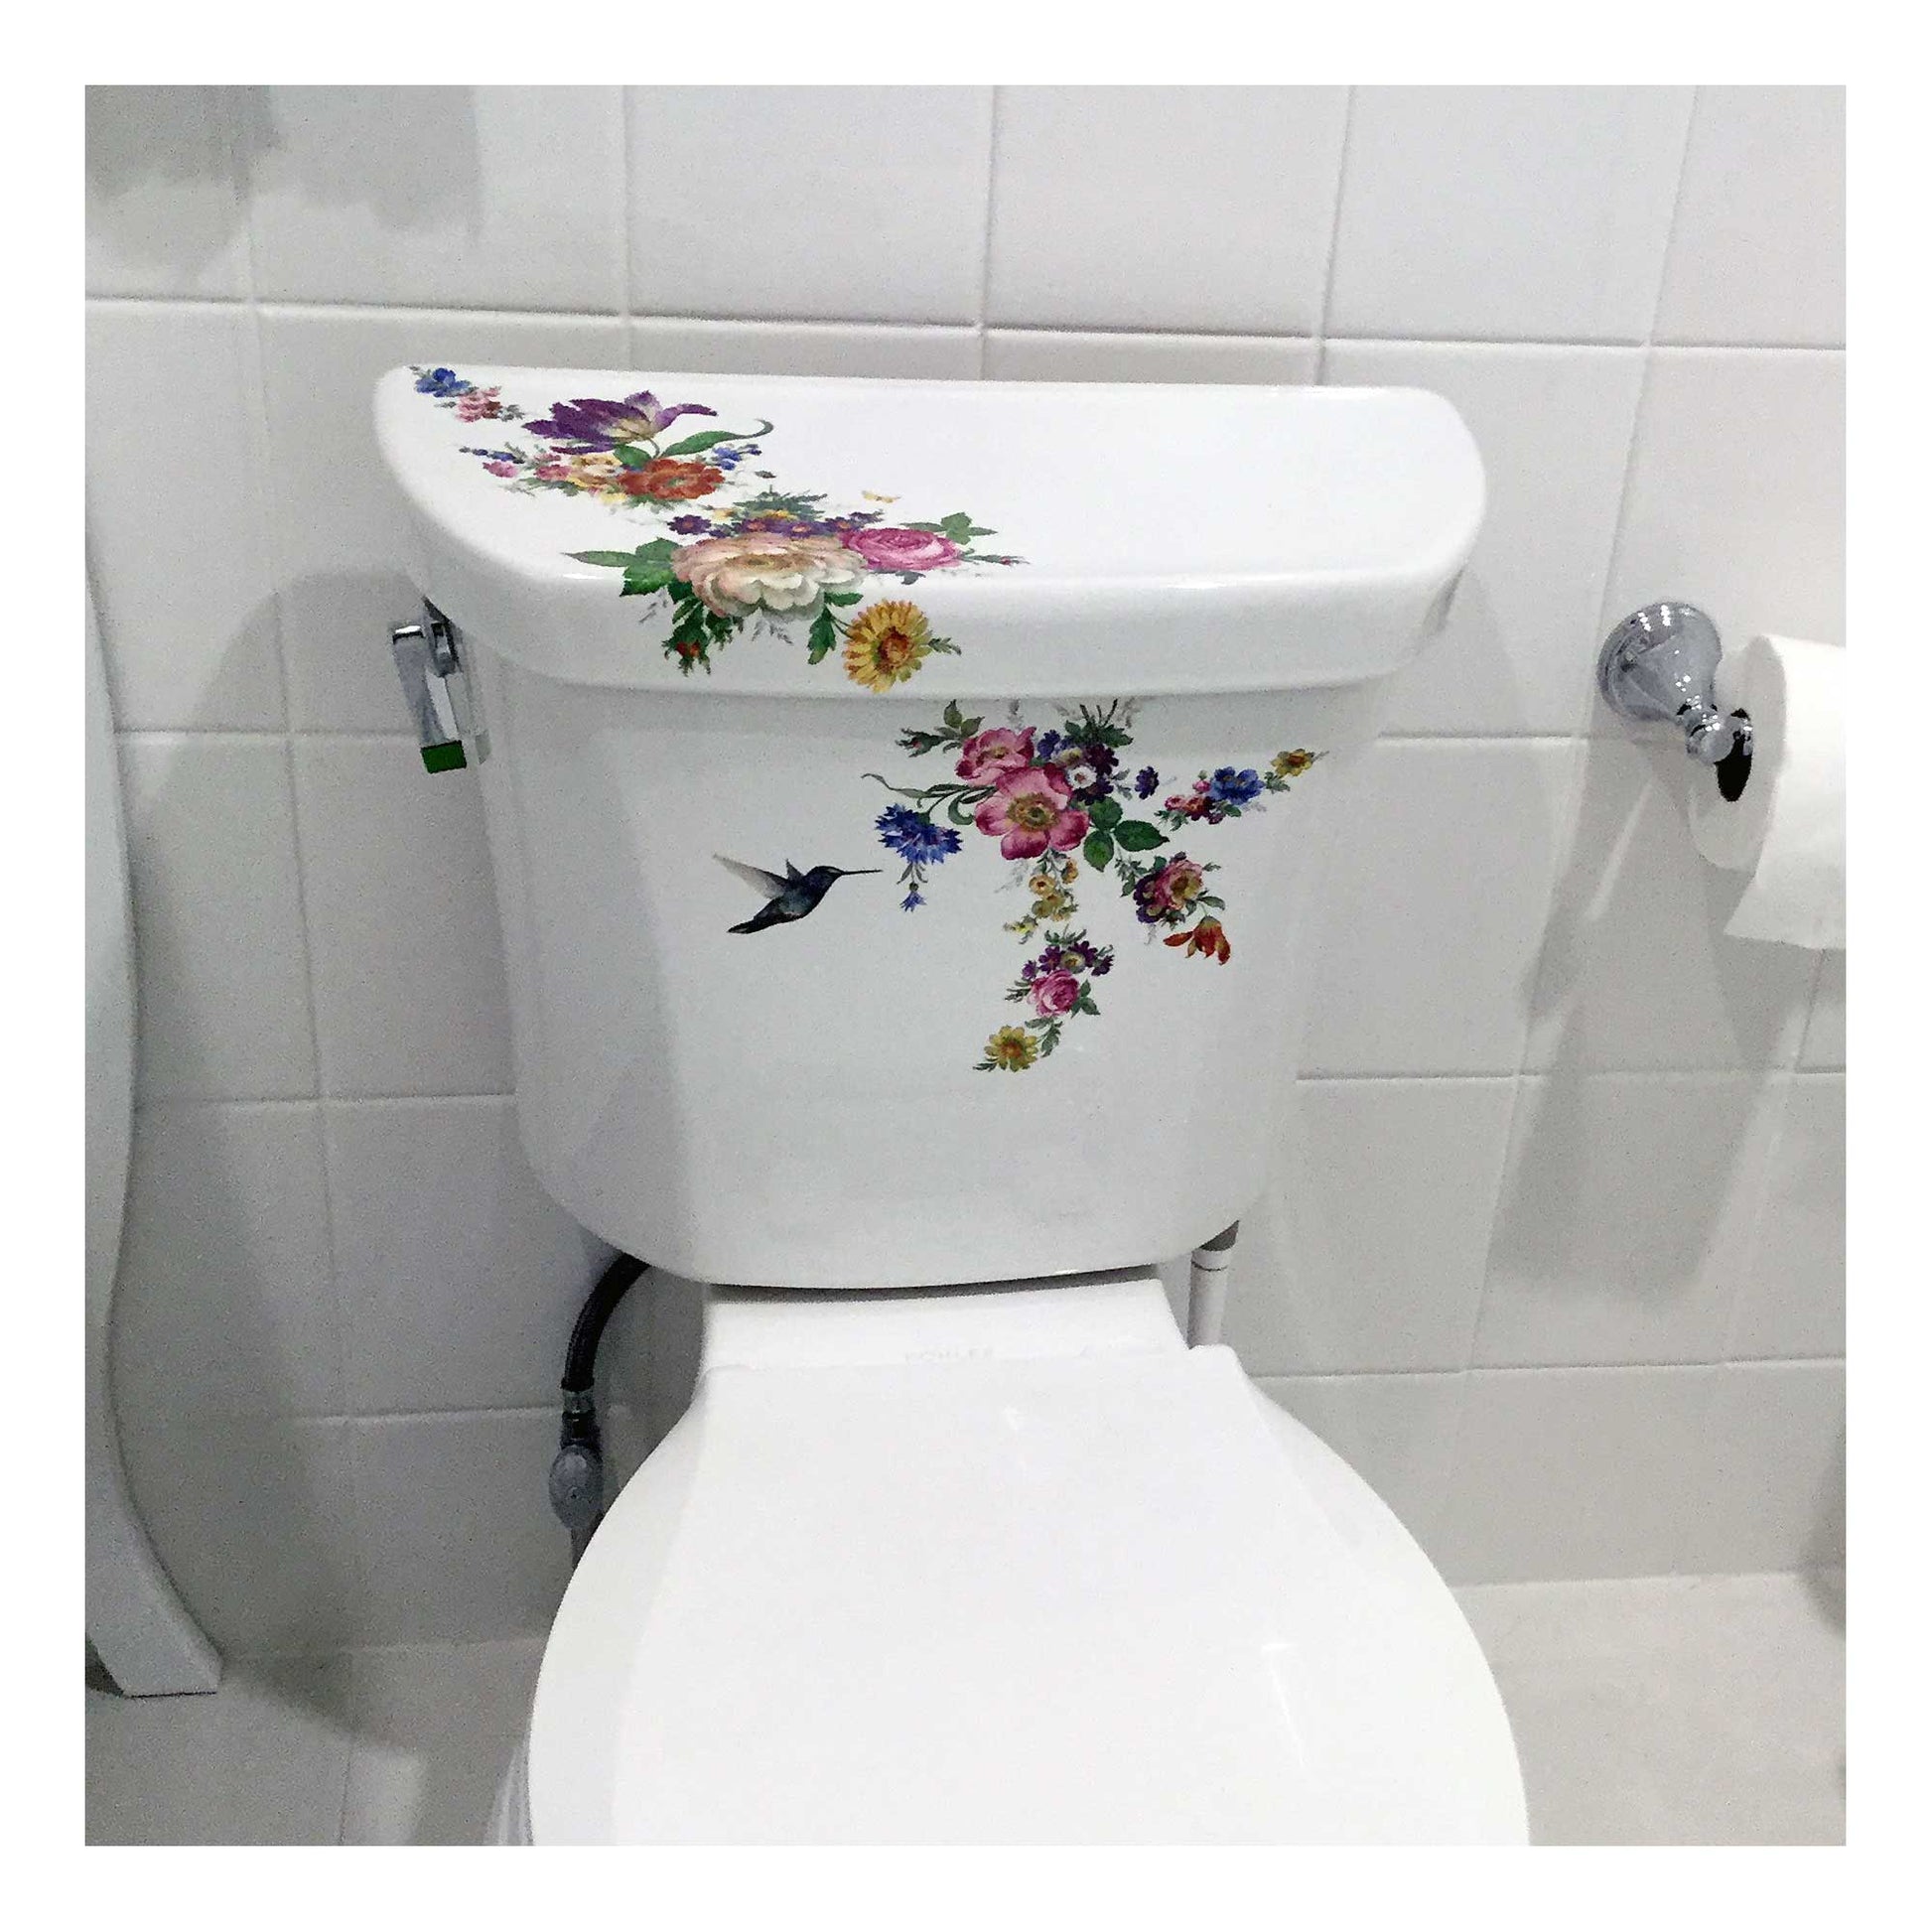 Kohler Highline toilet painted with flowers and hummingbird